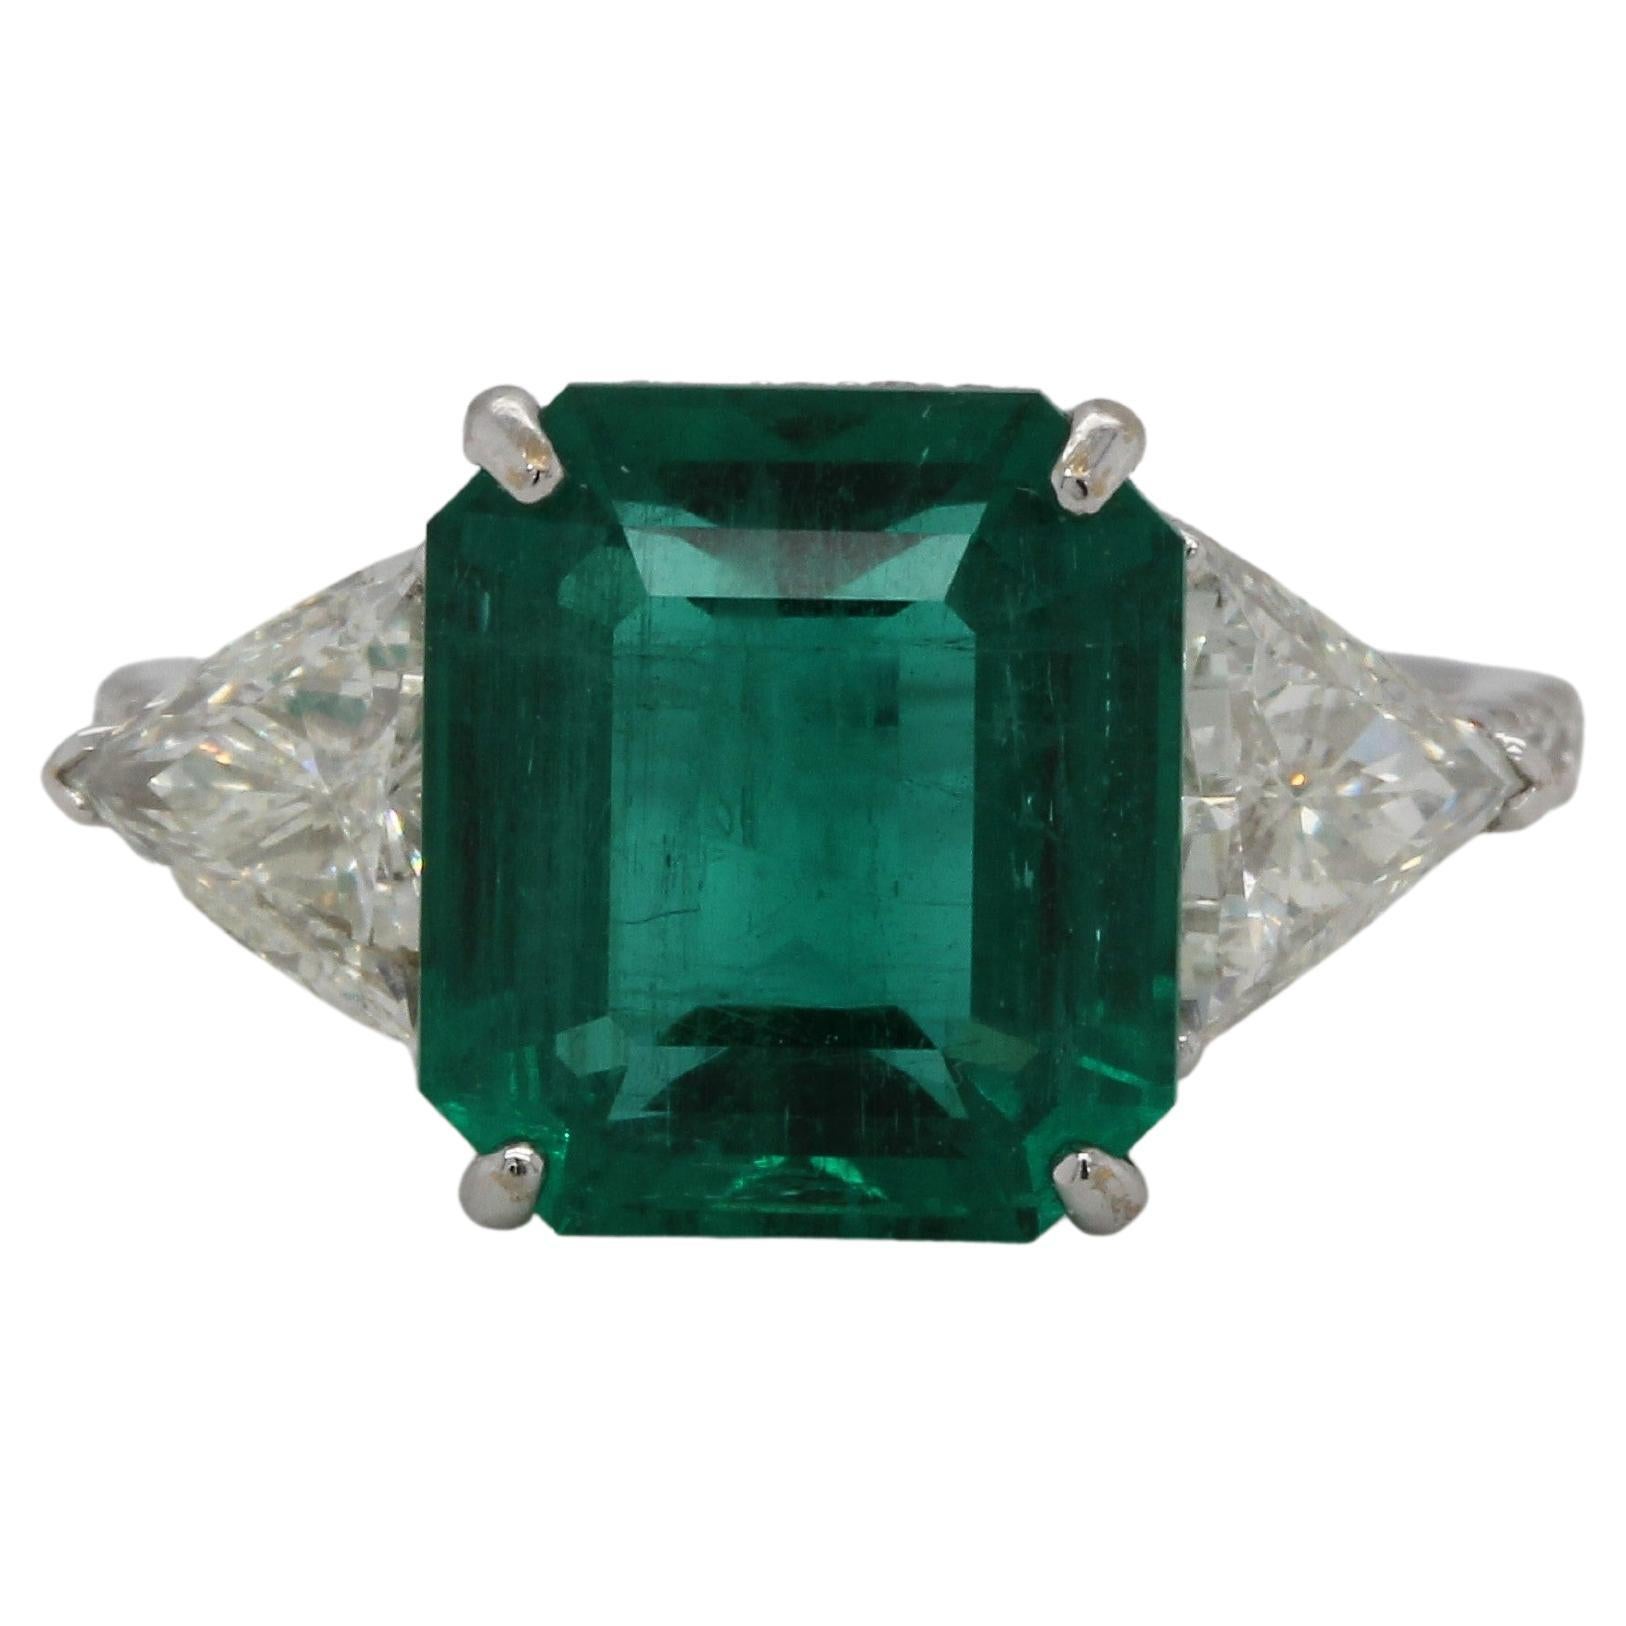 This timeless emerald and diamond ring is a chic statement piece to be enjoyed for years to come. Set in 18K white gold and layered with 0.42 carat of round diamonds, this elegant ring features an emerald cut 4.51 carats natural emerald that is